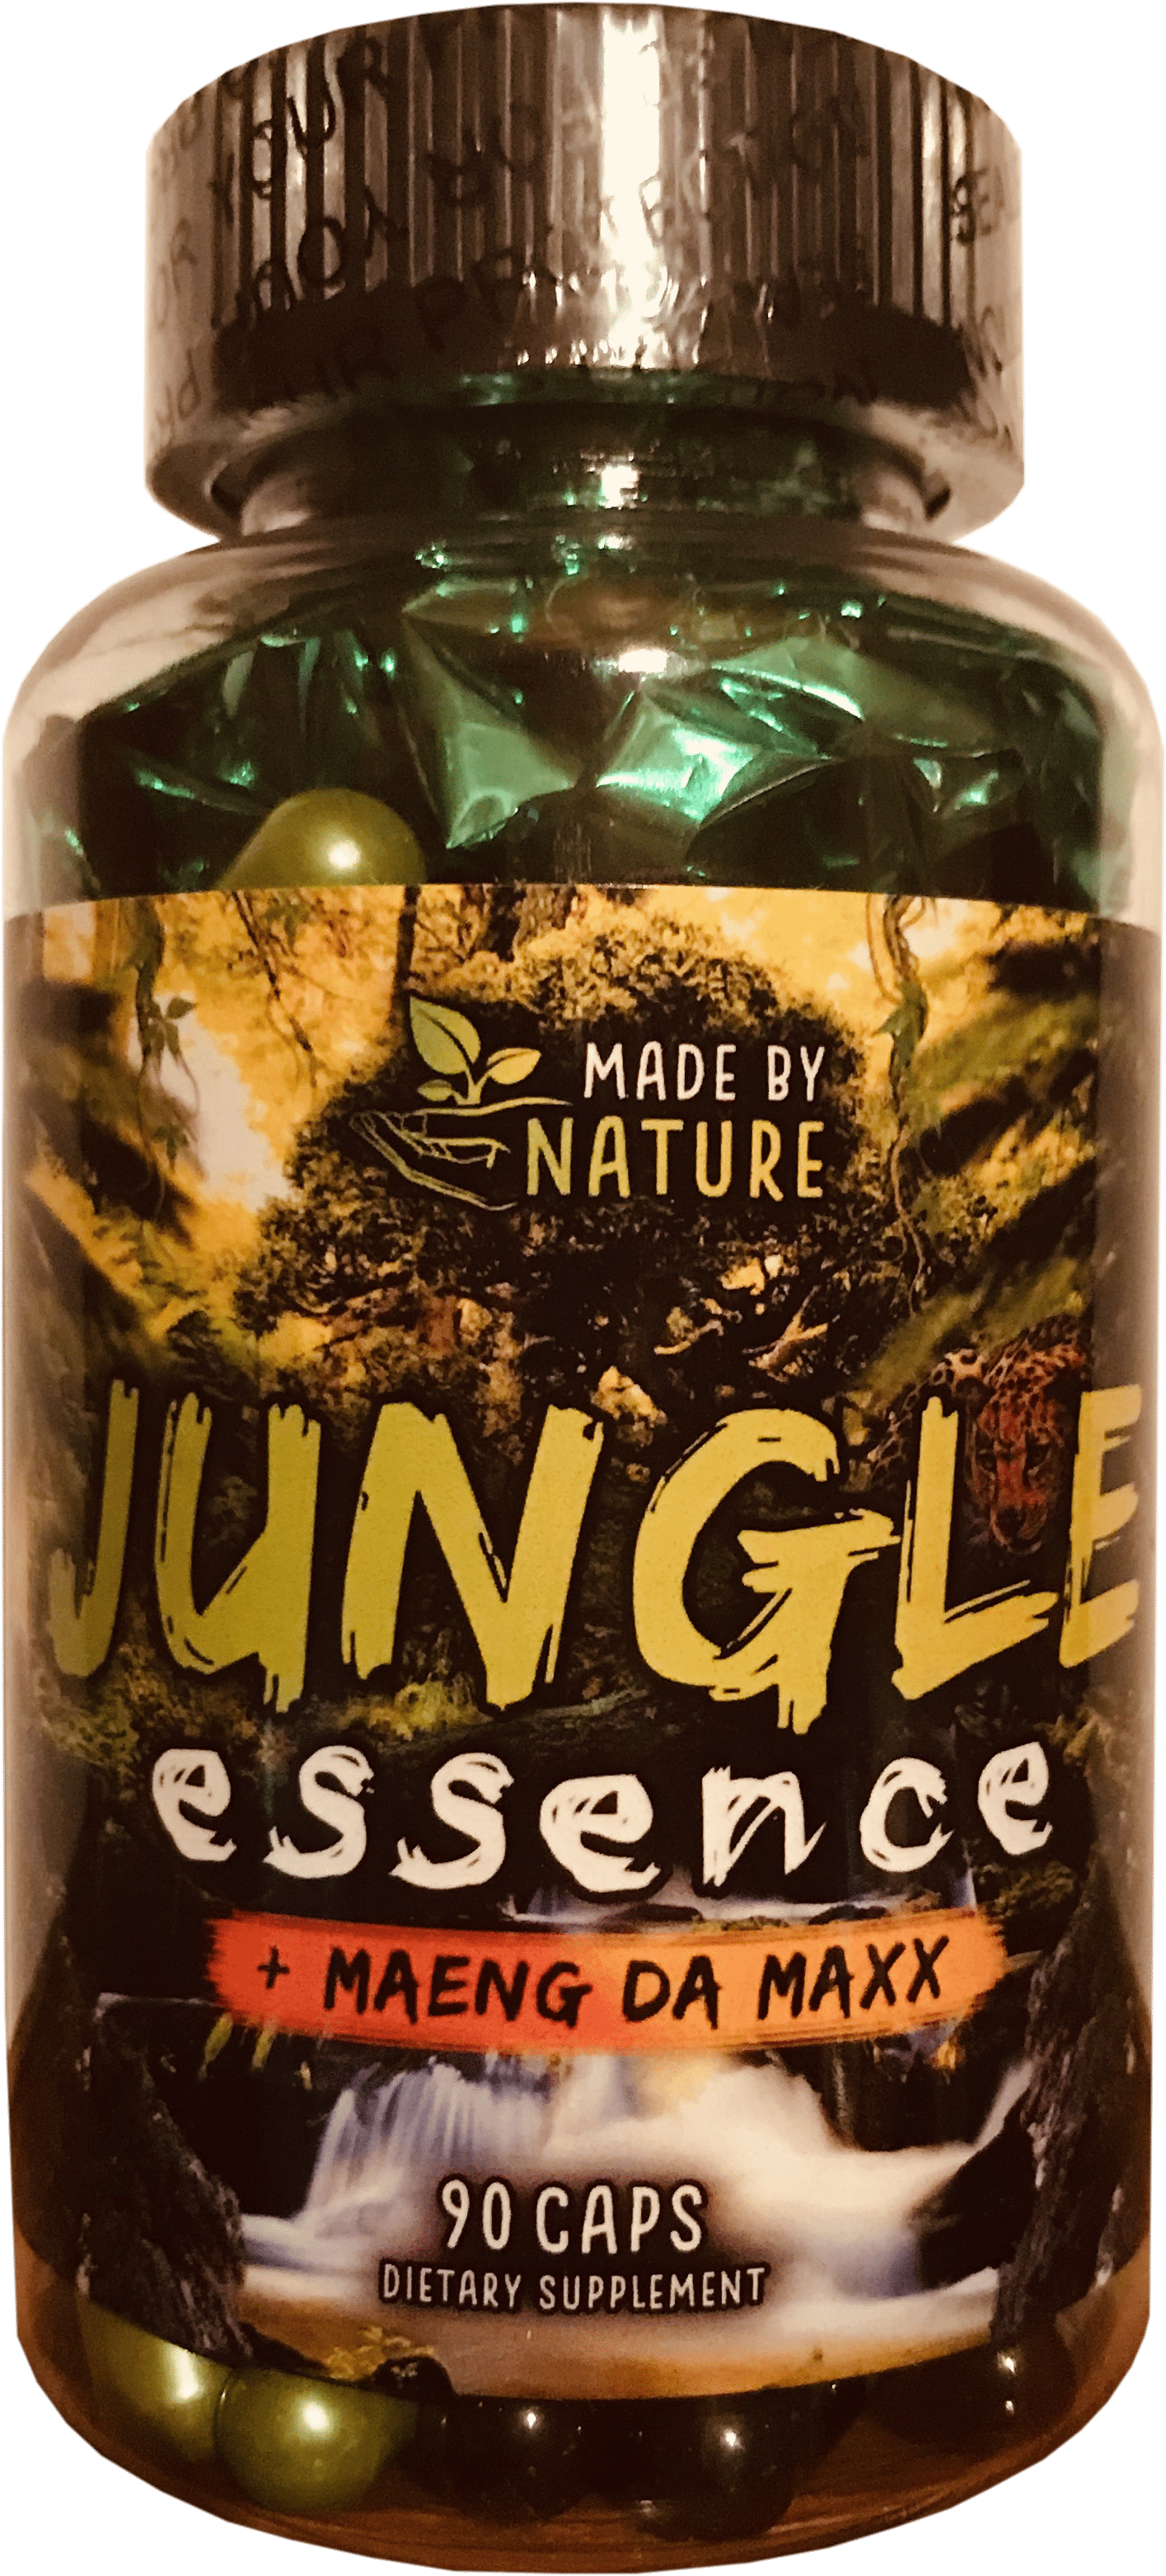 Made by Nature Jungle Essence + Maeng Da Maxx 90 шт. / 13 servings,  ml, Made By Nature. Nootropic. 